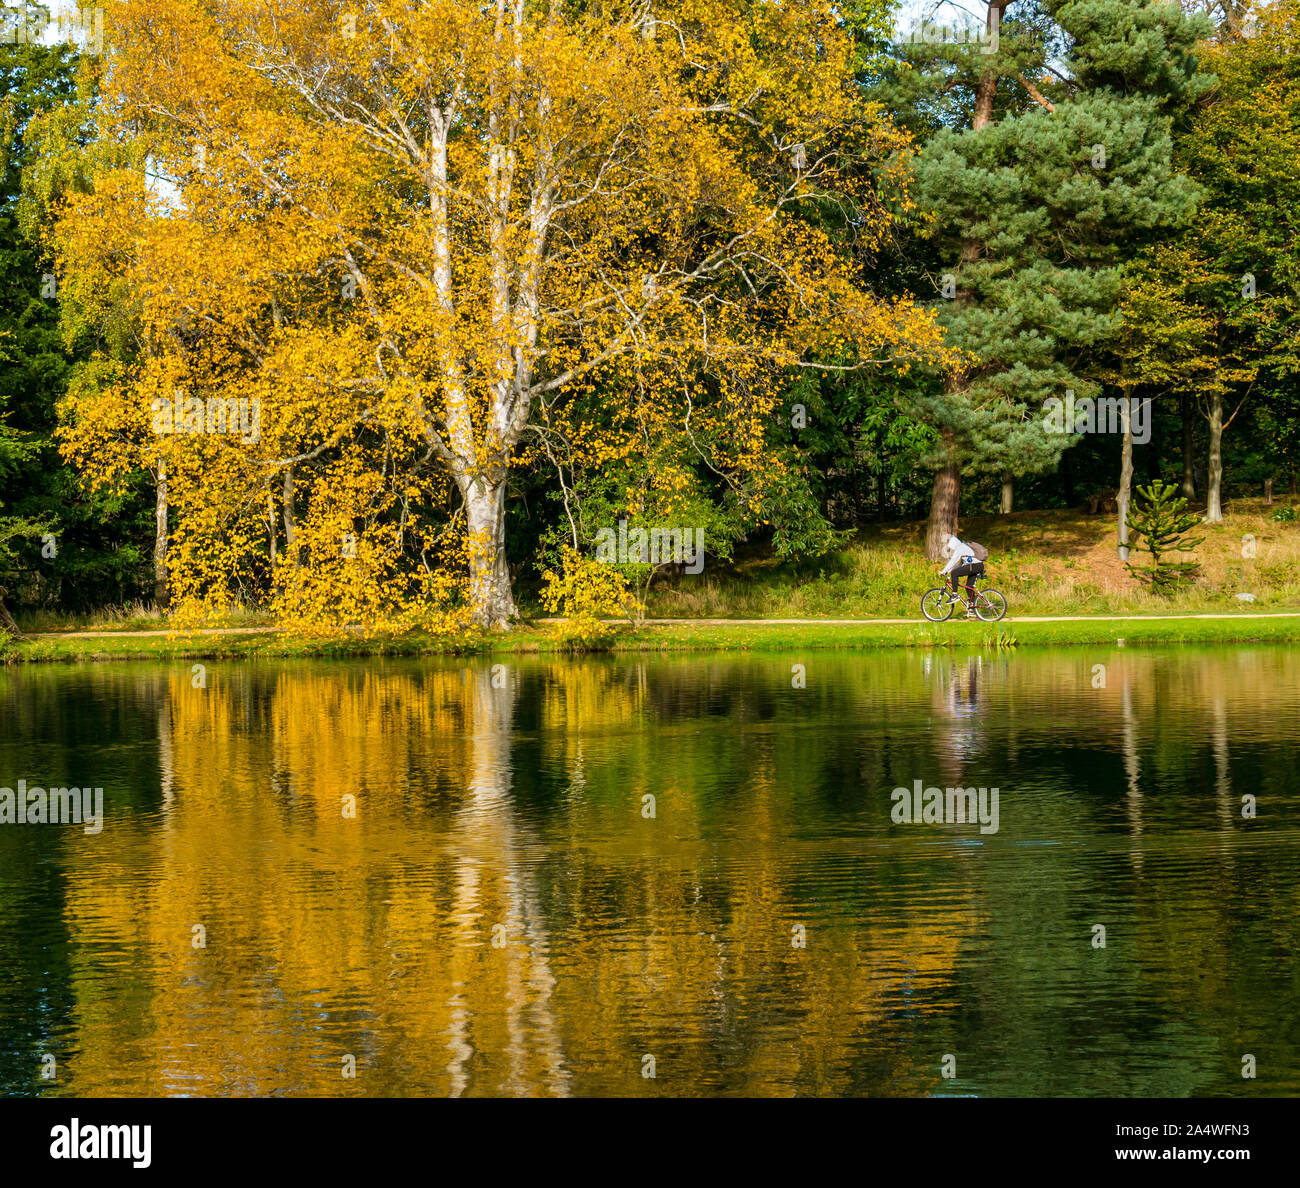 Cyclist riding bicycle next to artificial lake with Autumn reflections, Gosford Estate, East Lothian, Scotland, UK Stock Photo